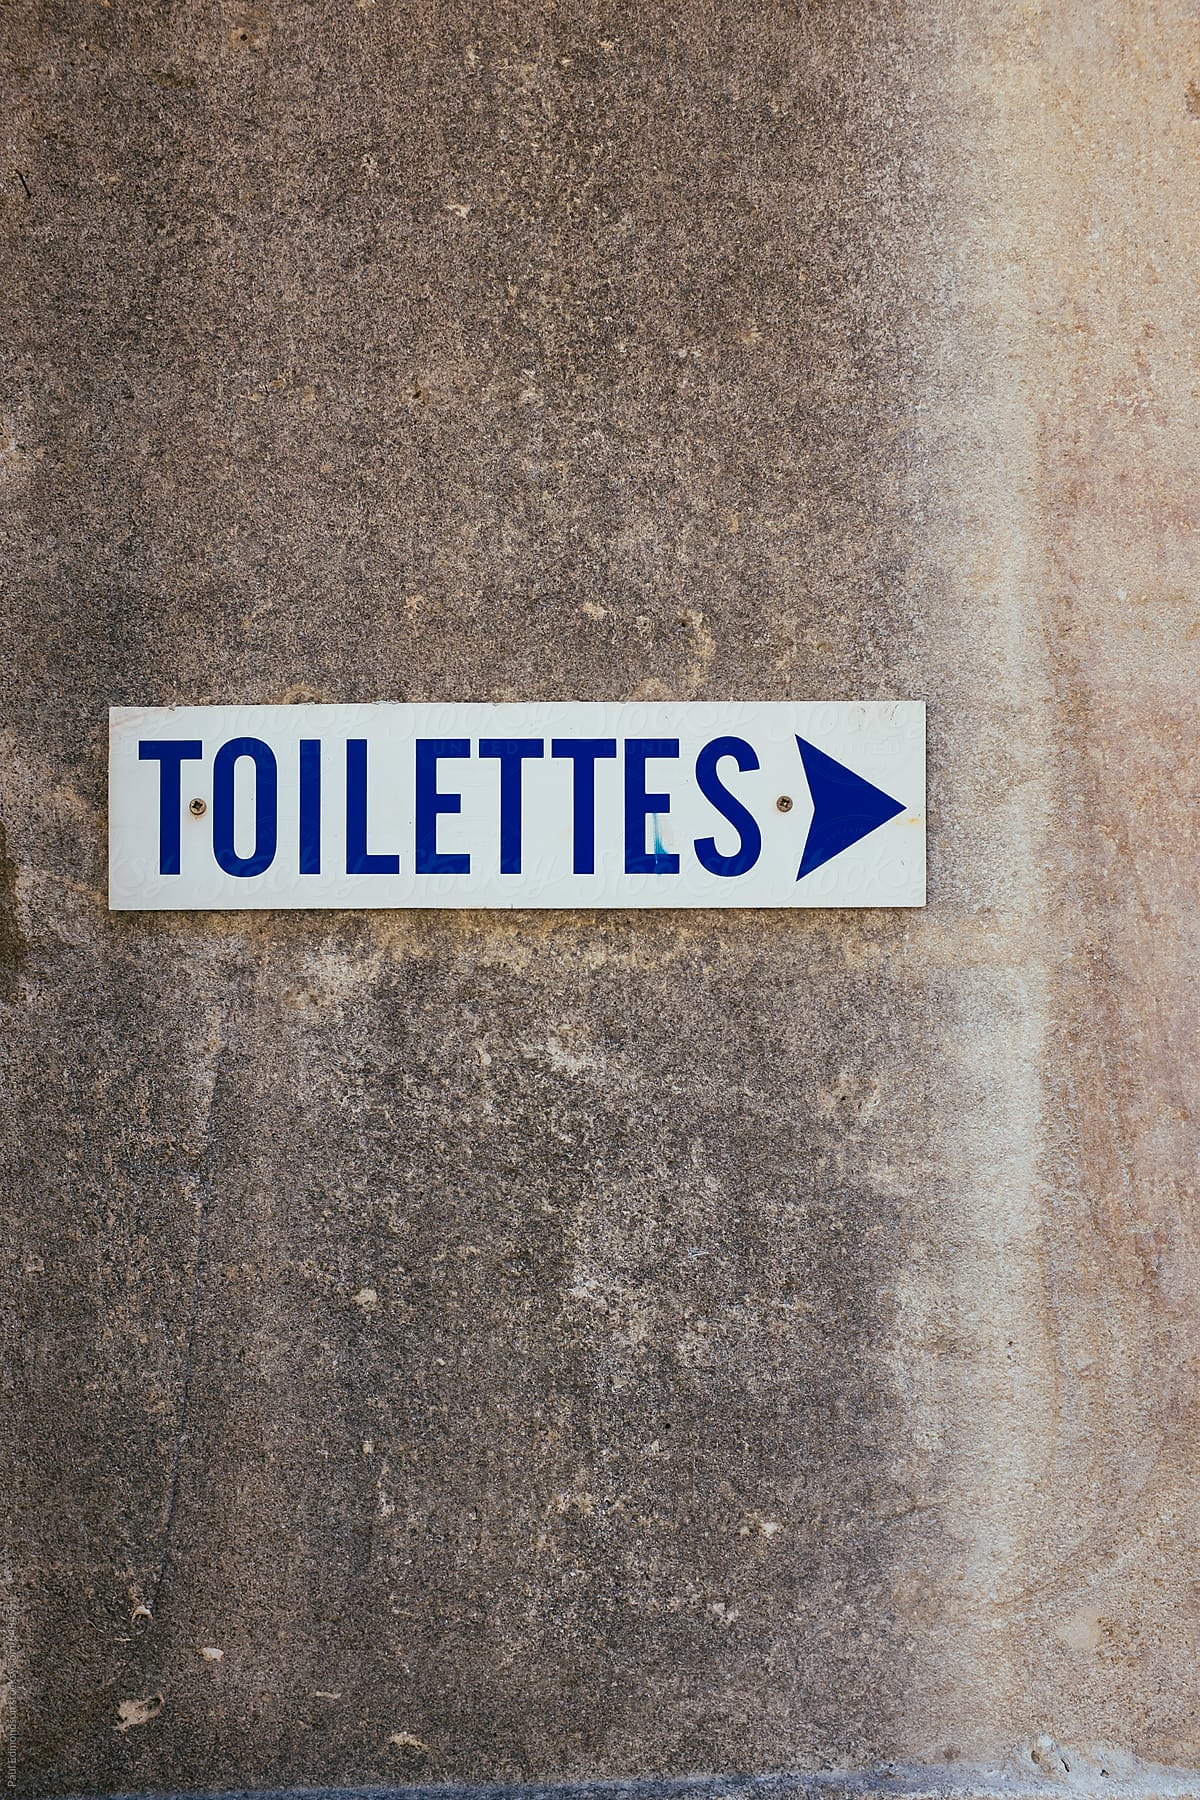 Toilettes sign on wall, Provence, France